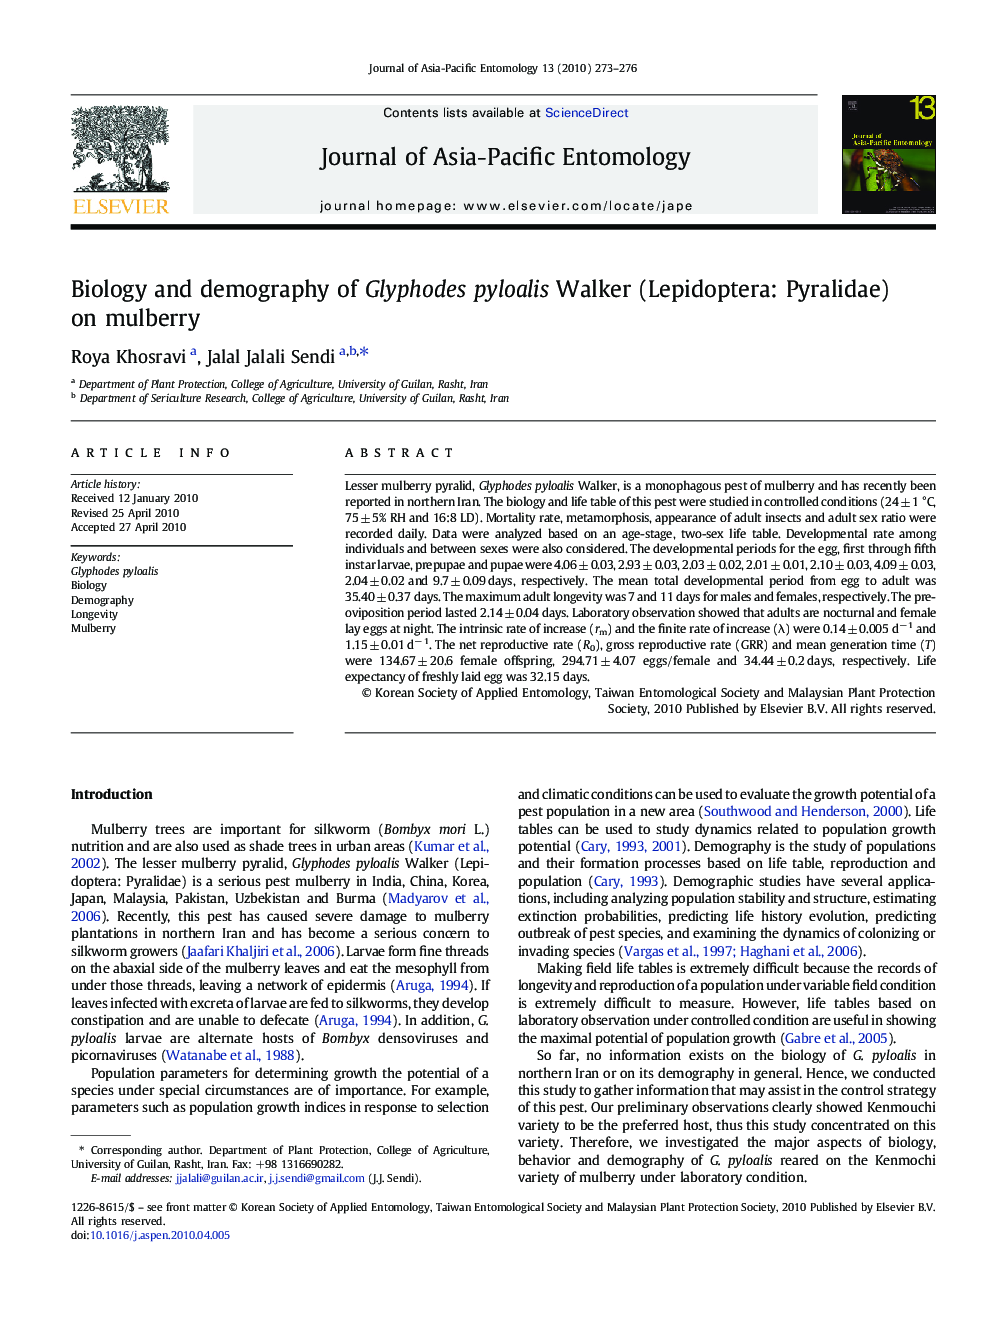 Biology and demography of Glyphodes pyloalis Walker (Lepidoptera: Pyralidae) on mulberry